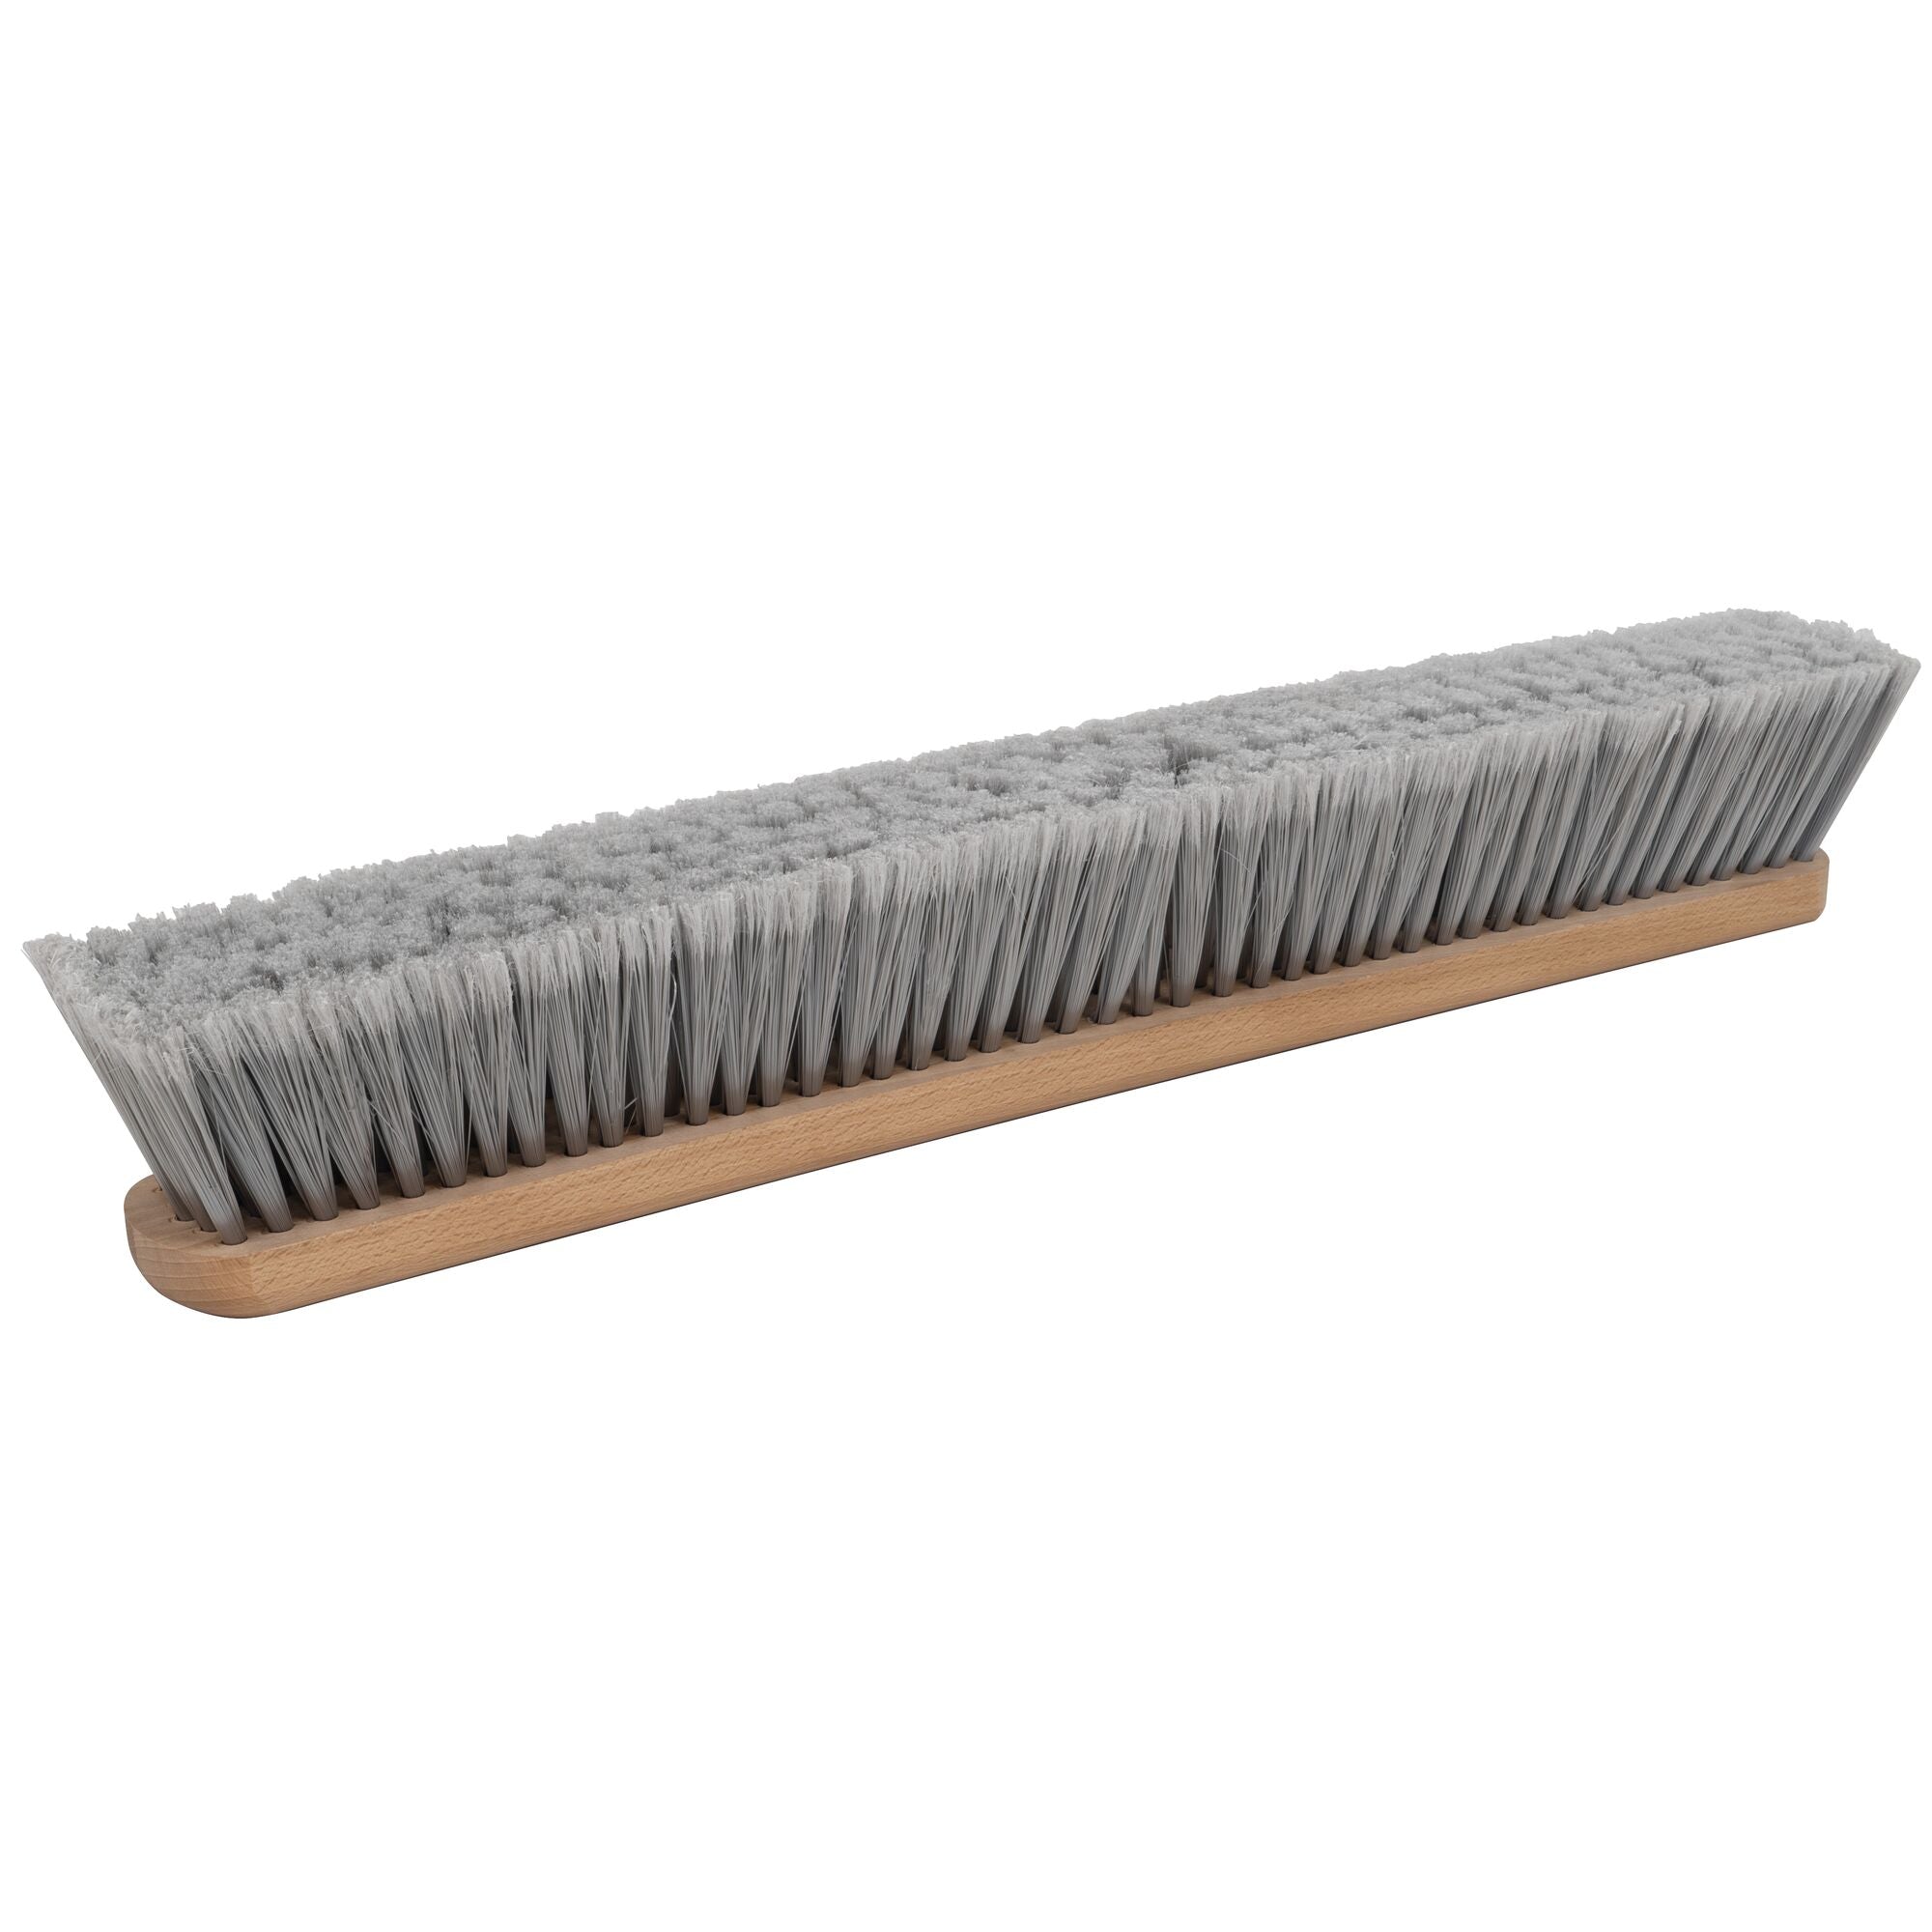 24 inch shop-and-garage push broom's split-tipped fibers for fine dust pick up